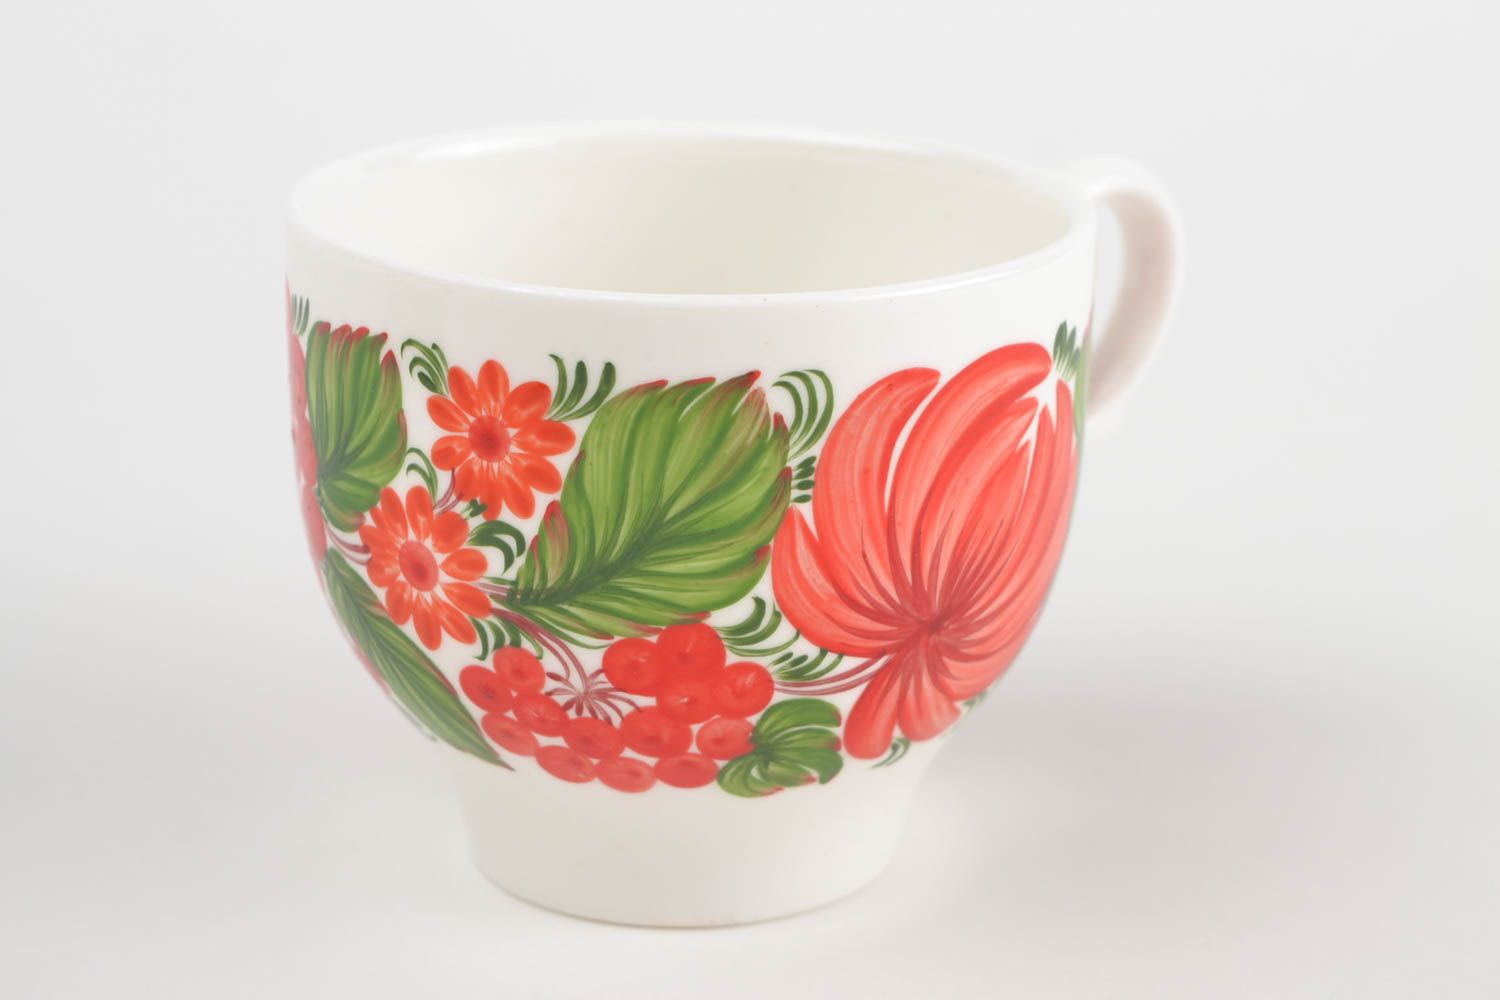 8 oz ceramic porcelain cup in white, red, and green color with handle and Russian style pattern photo 5